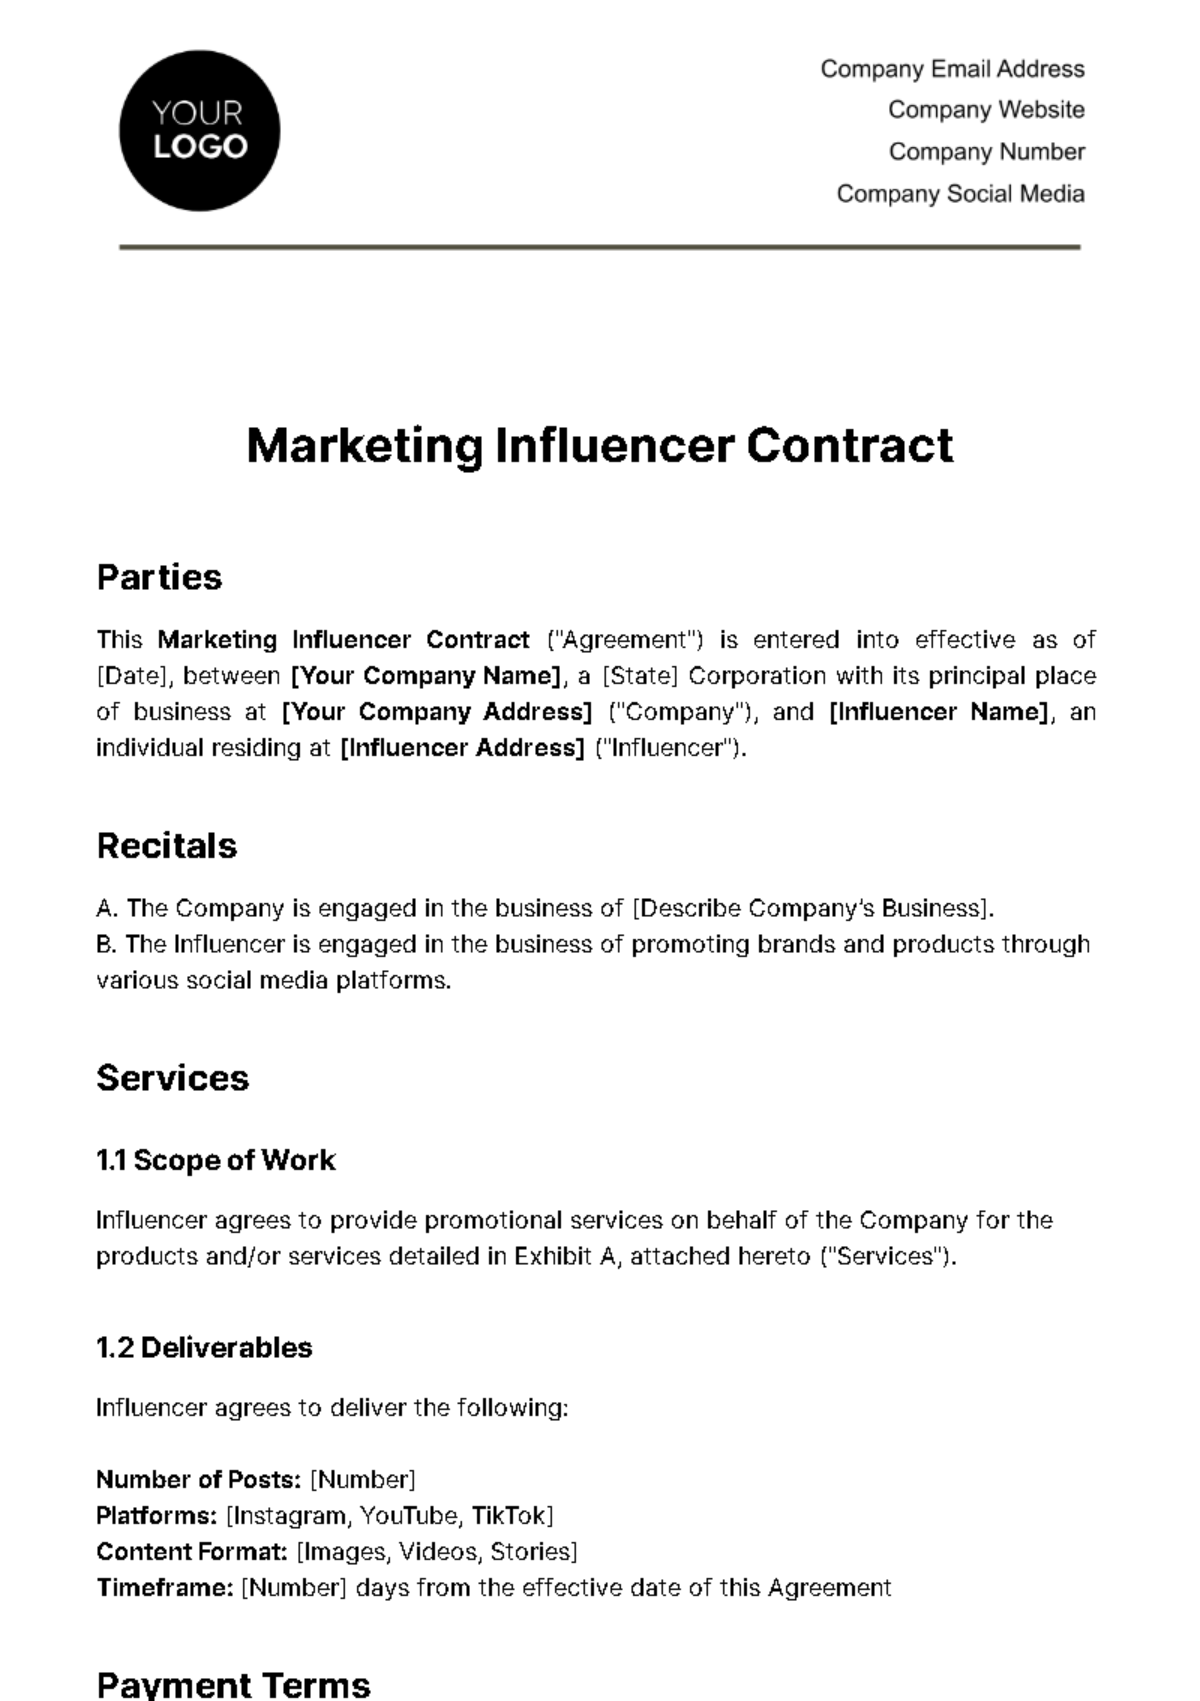 Marketing Influencer Contract Template